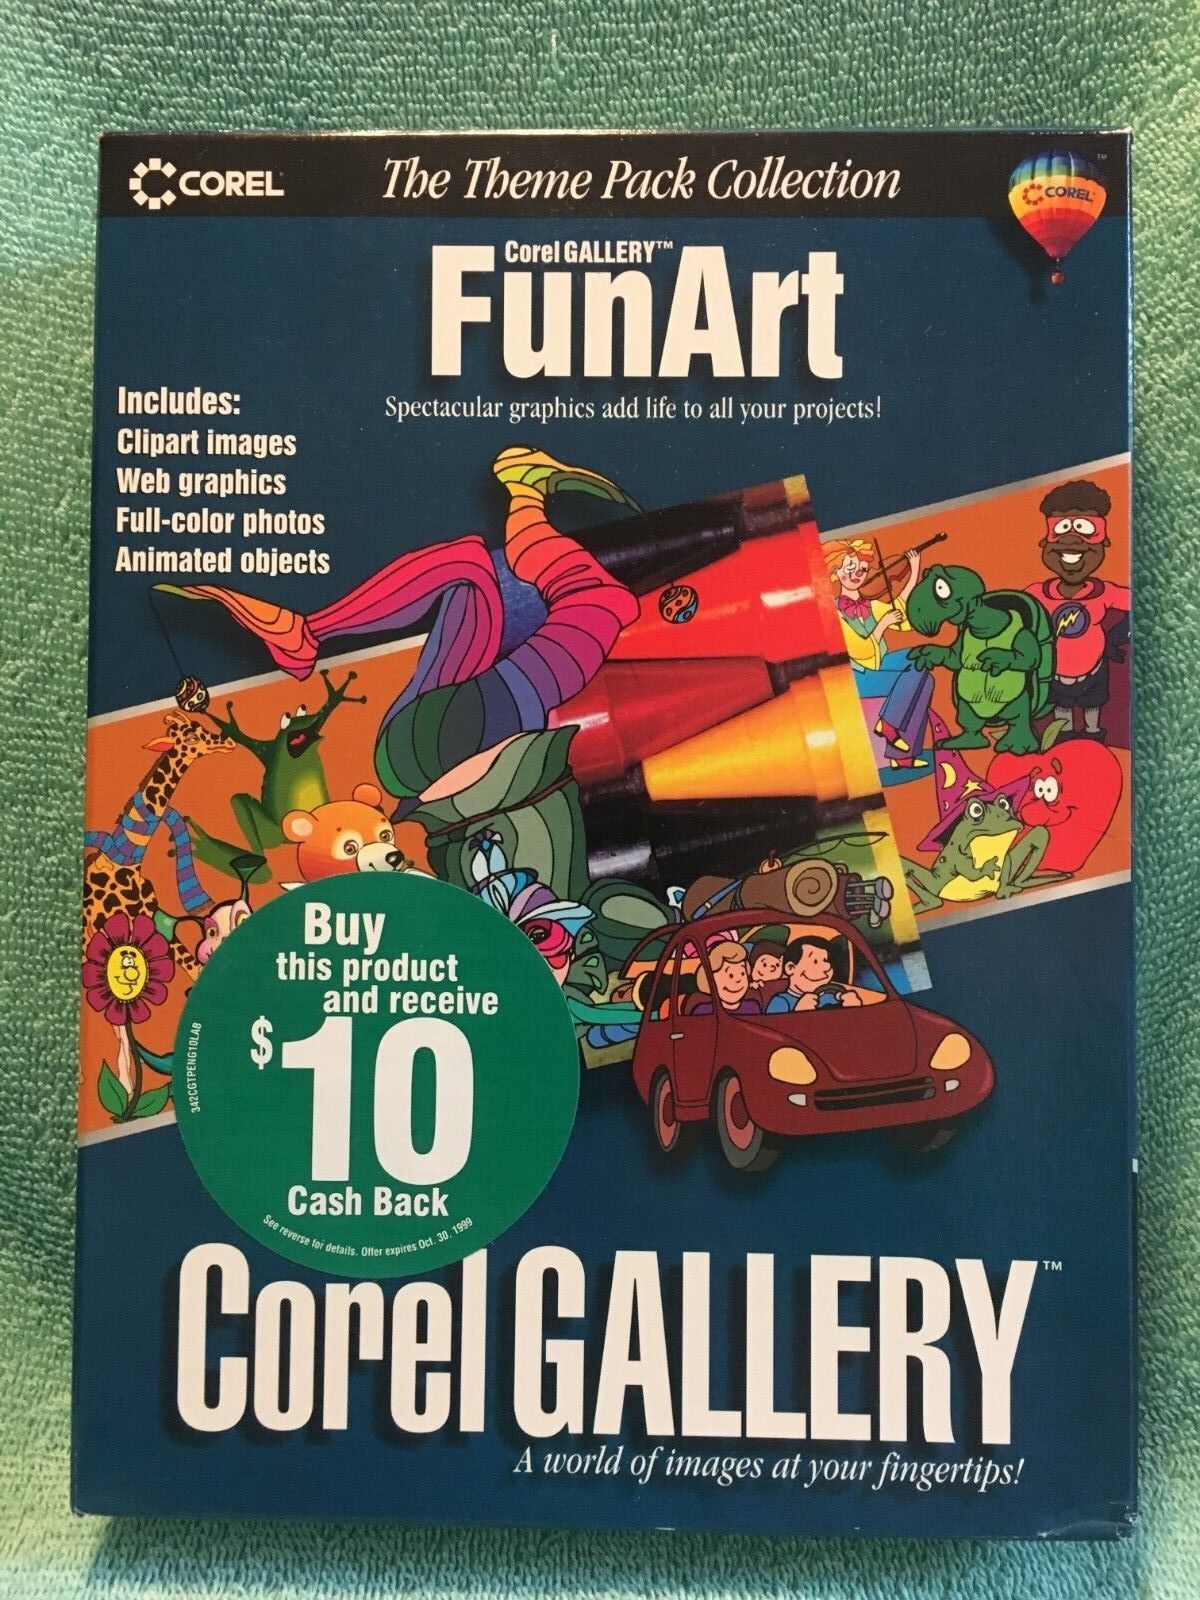 Corel Gallery FunArt PC CD clip art, web graphics, photos and more (New)